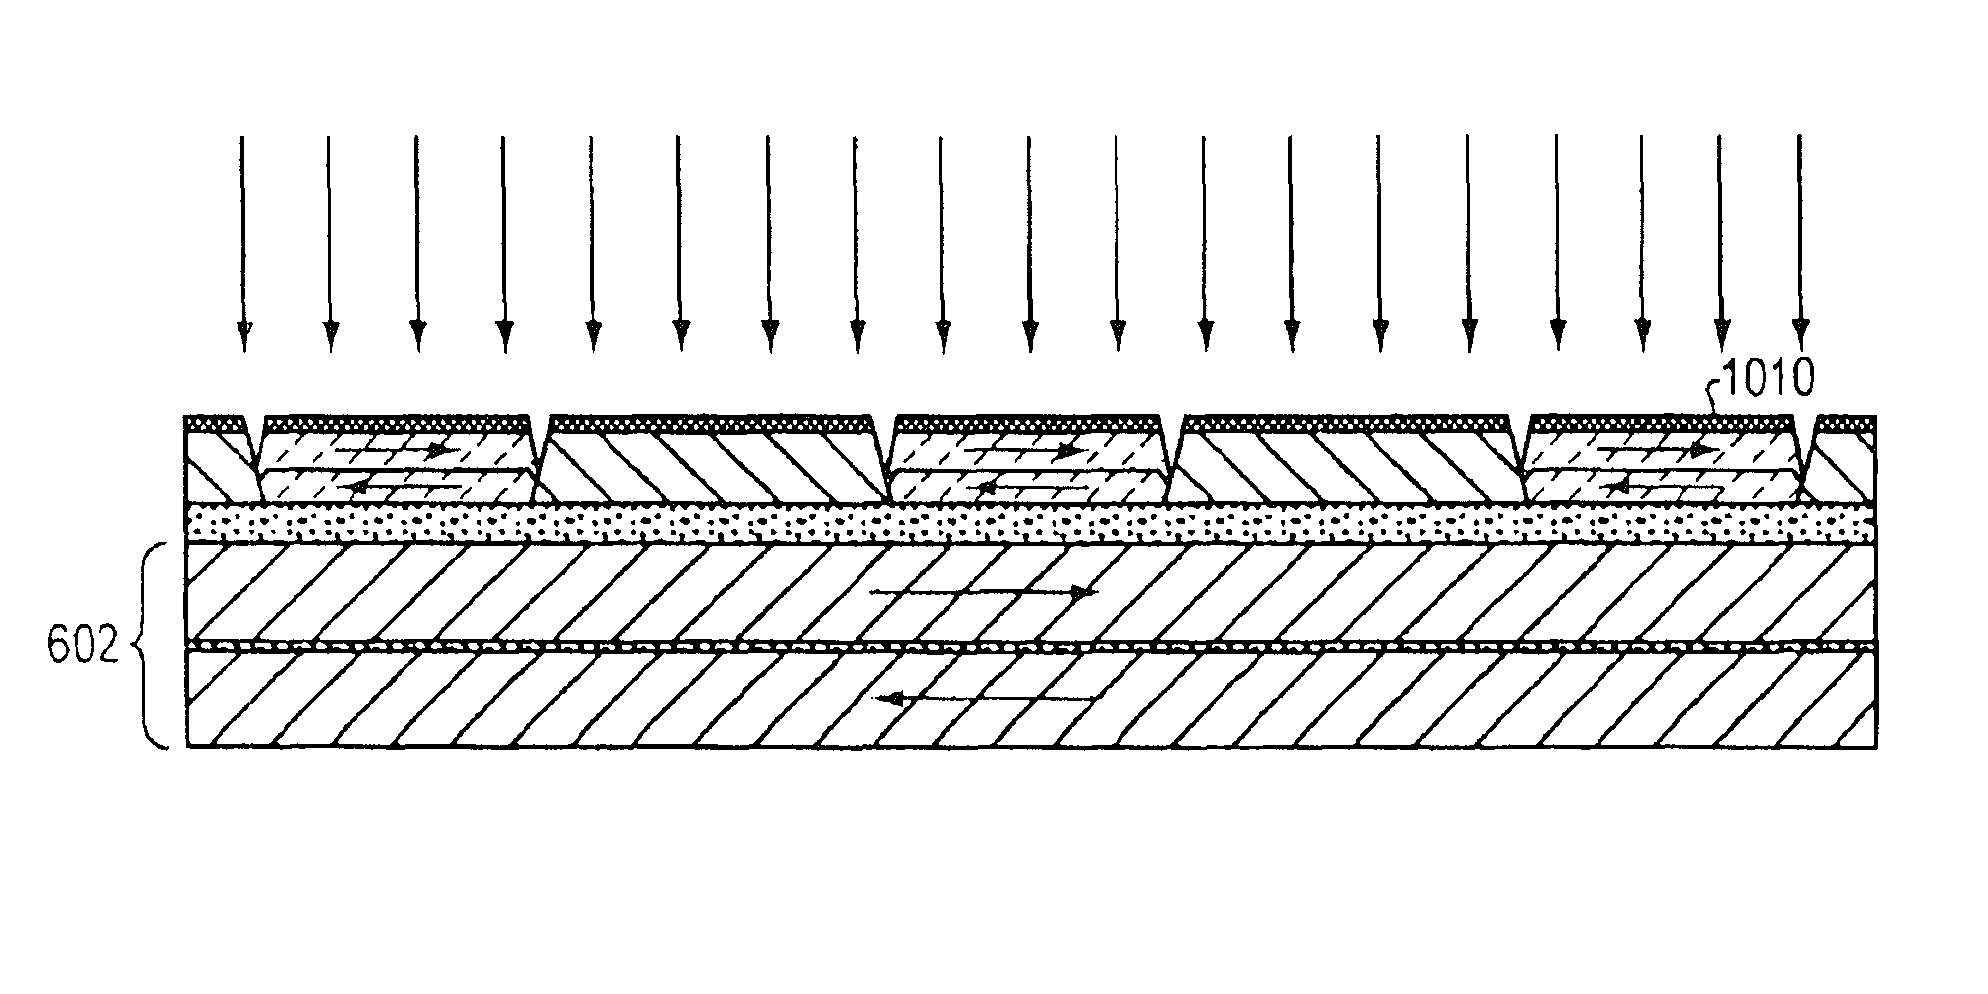 Recording disk with antiferromagnetically coupled multilayer ferromagnetic island disposed in trench between discrete tracks